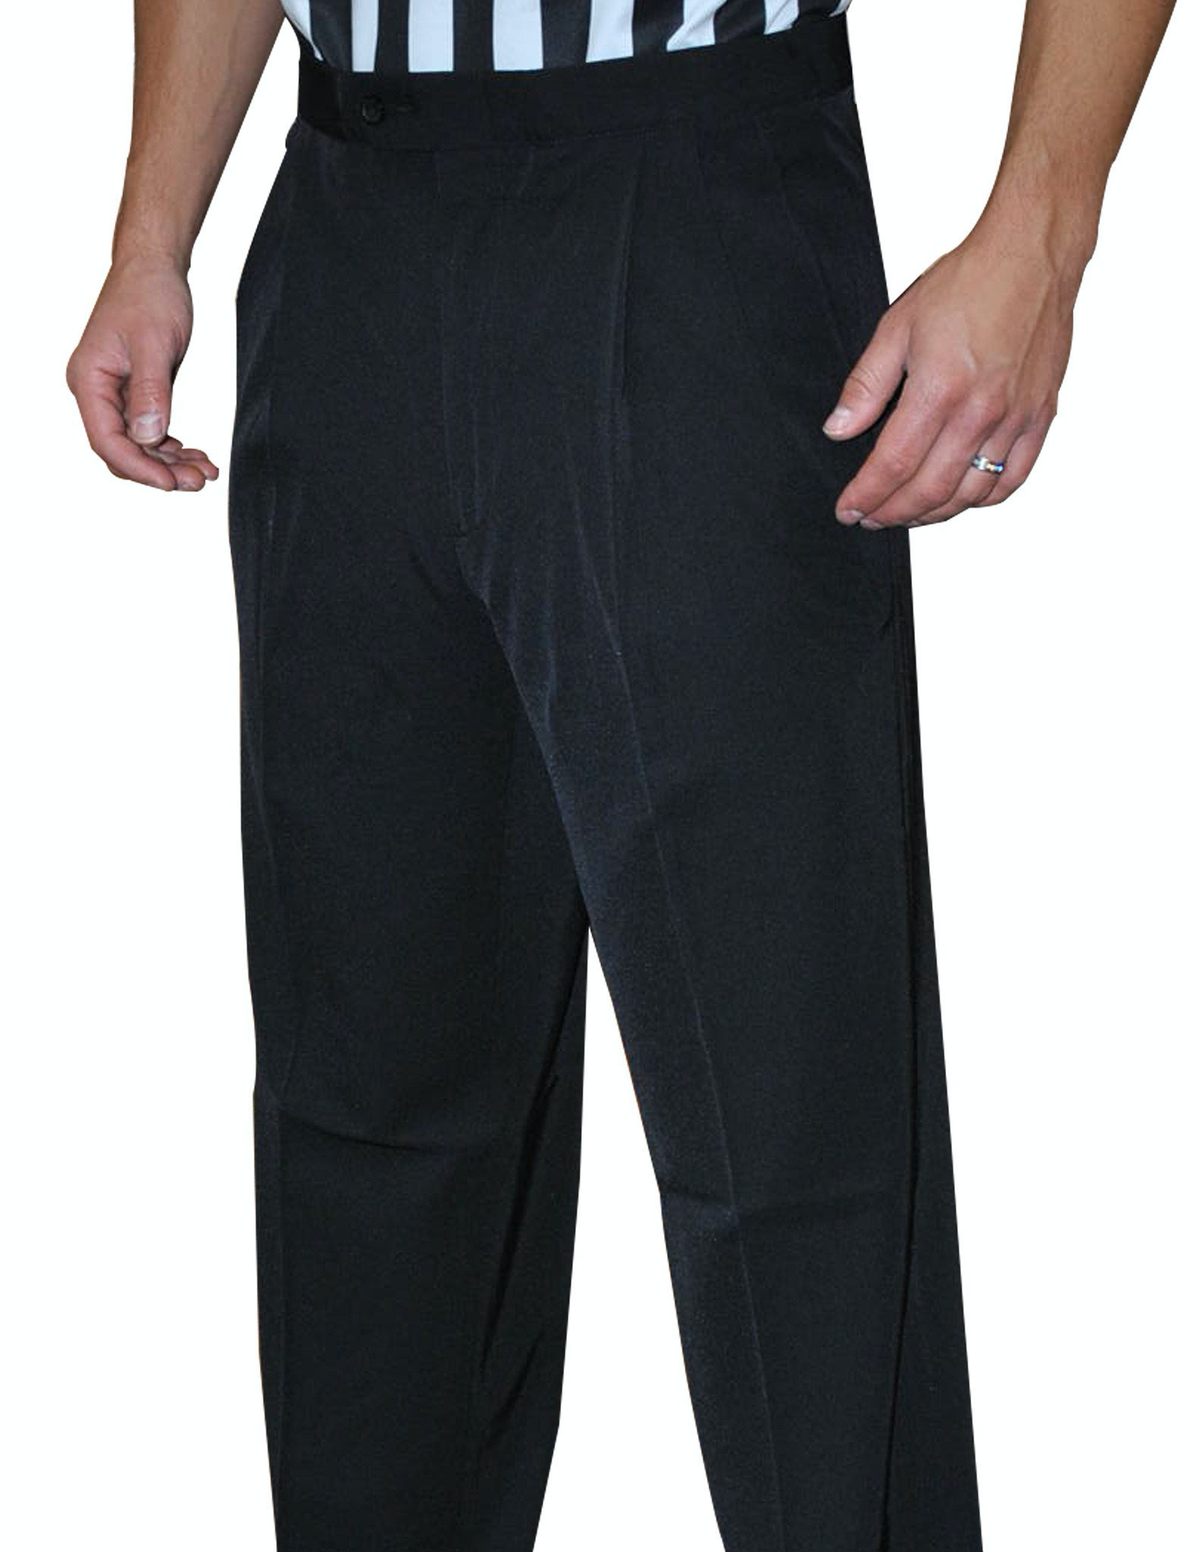 Smitty | BKS-291 | NEW TAPERED FIT | 4-Way Stretch Pleated Referee Pants w/ Slash Pockets | Basketball | Wrestling - Great Call Athletics